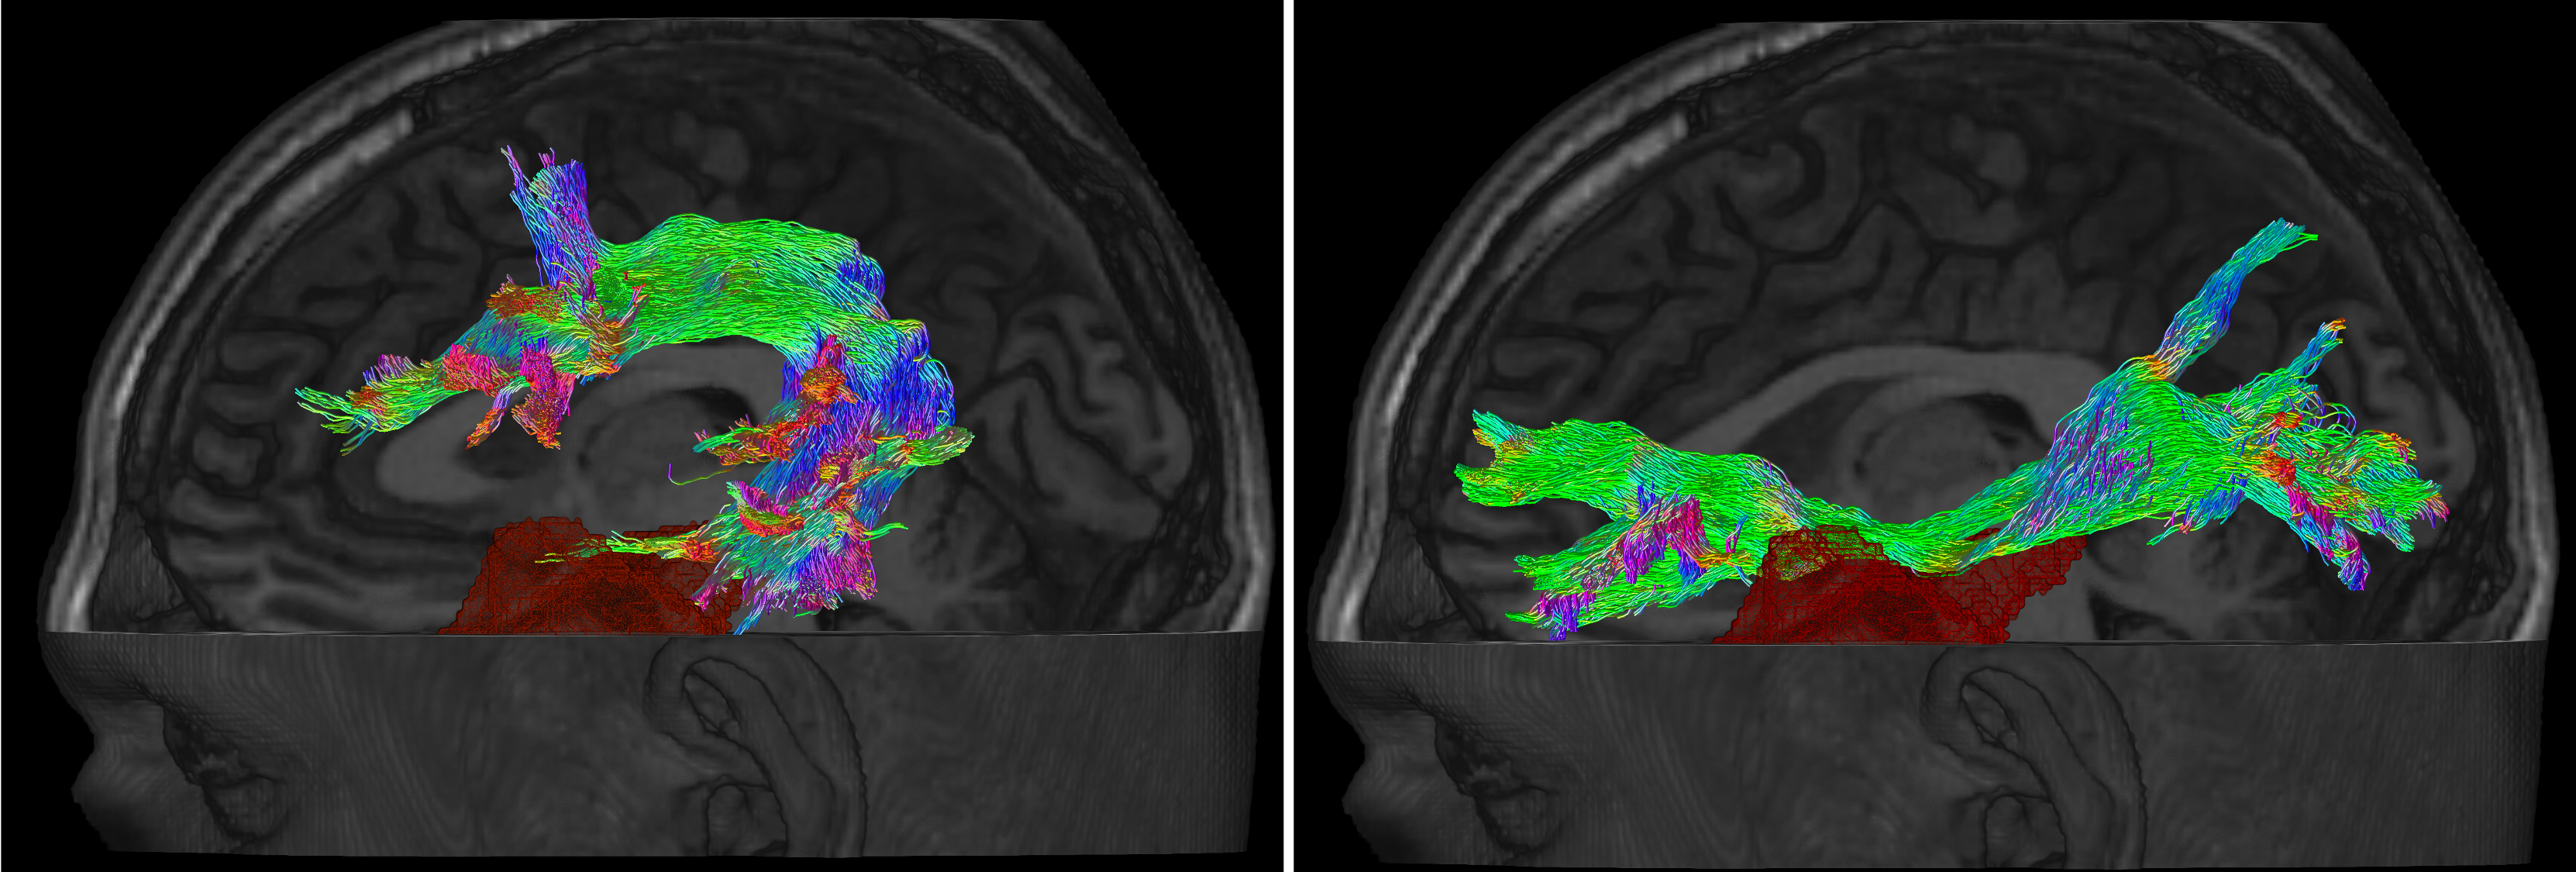 Two fibre bundles involved in language at risk of damage during temporal lobe epilepsy surgery: arcuate fasciculus (left), inferior fronto-occipital fasciculus (right) are damaged in this example, with the resection indicated in red.